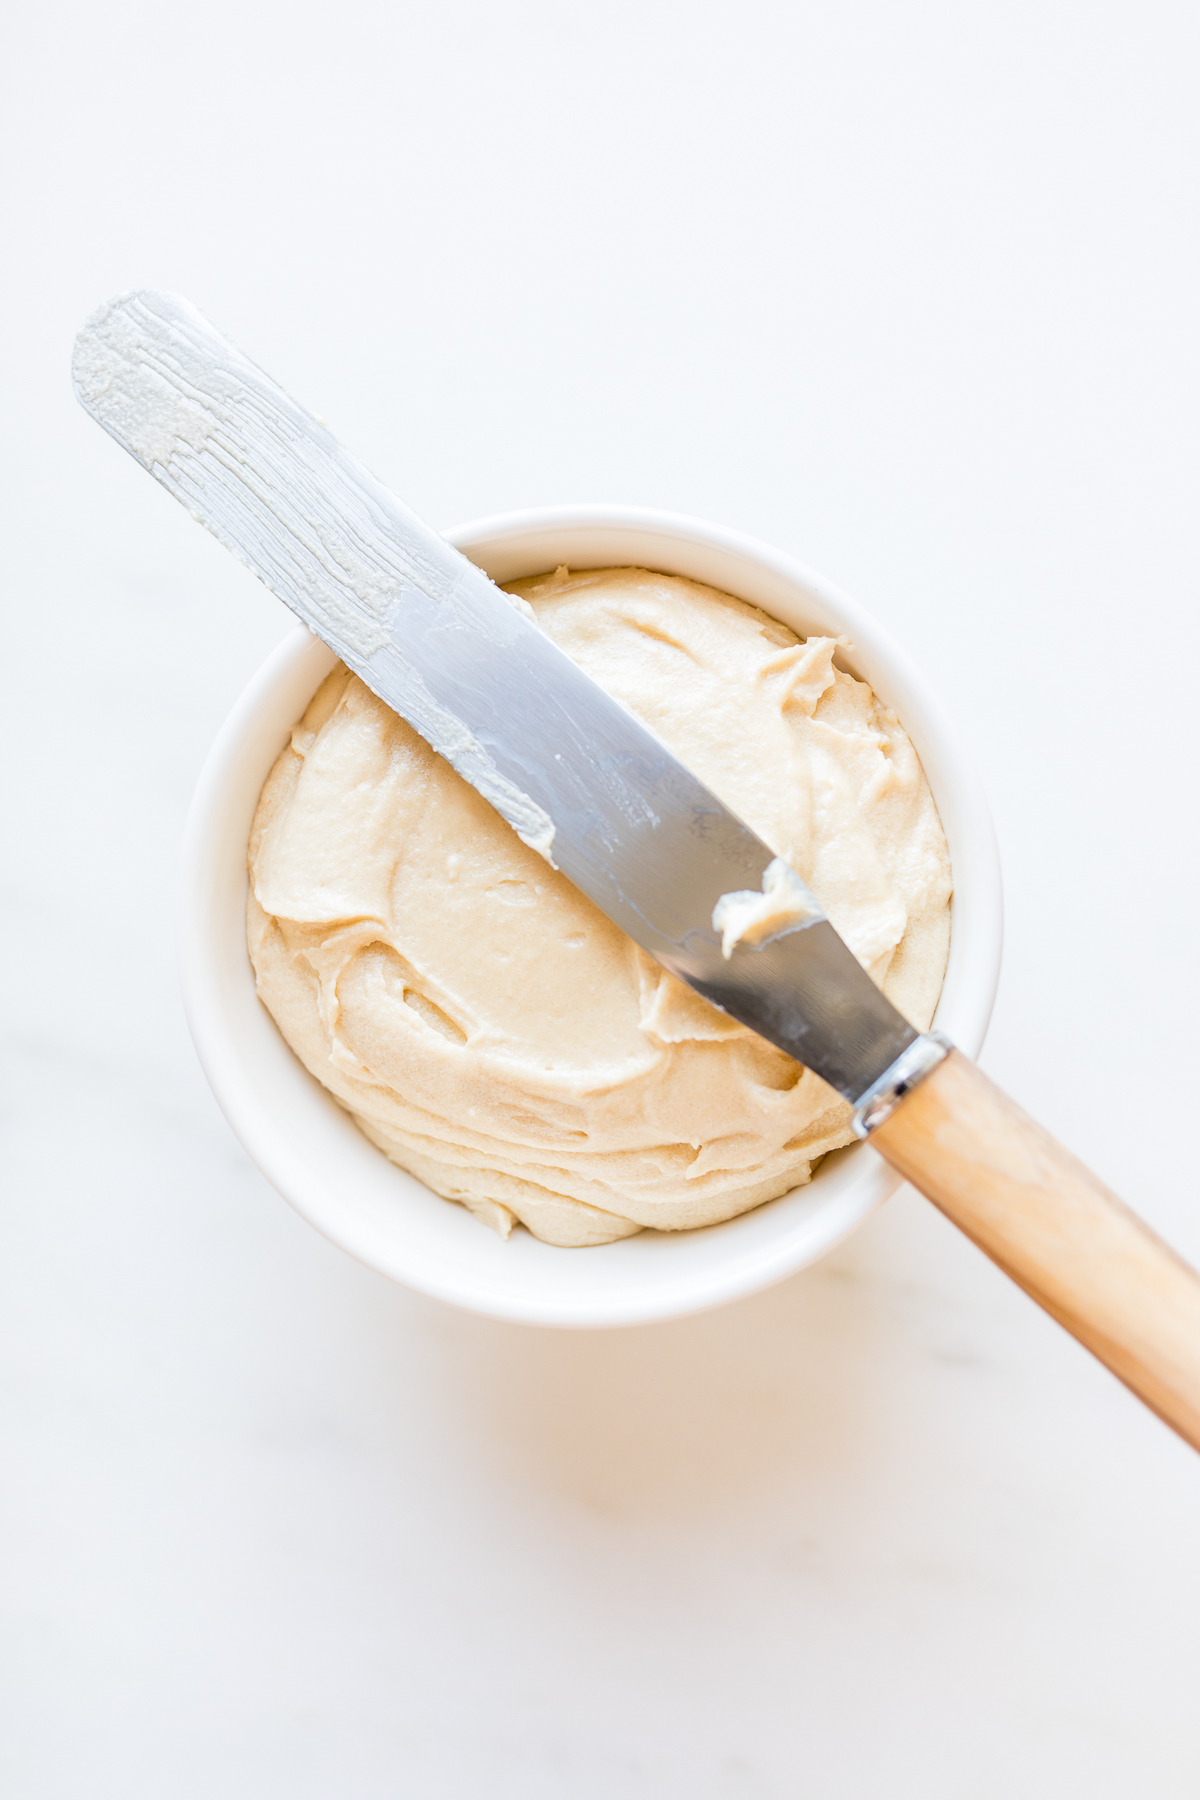 Caramel frosting in a white bowl